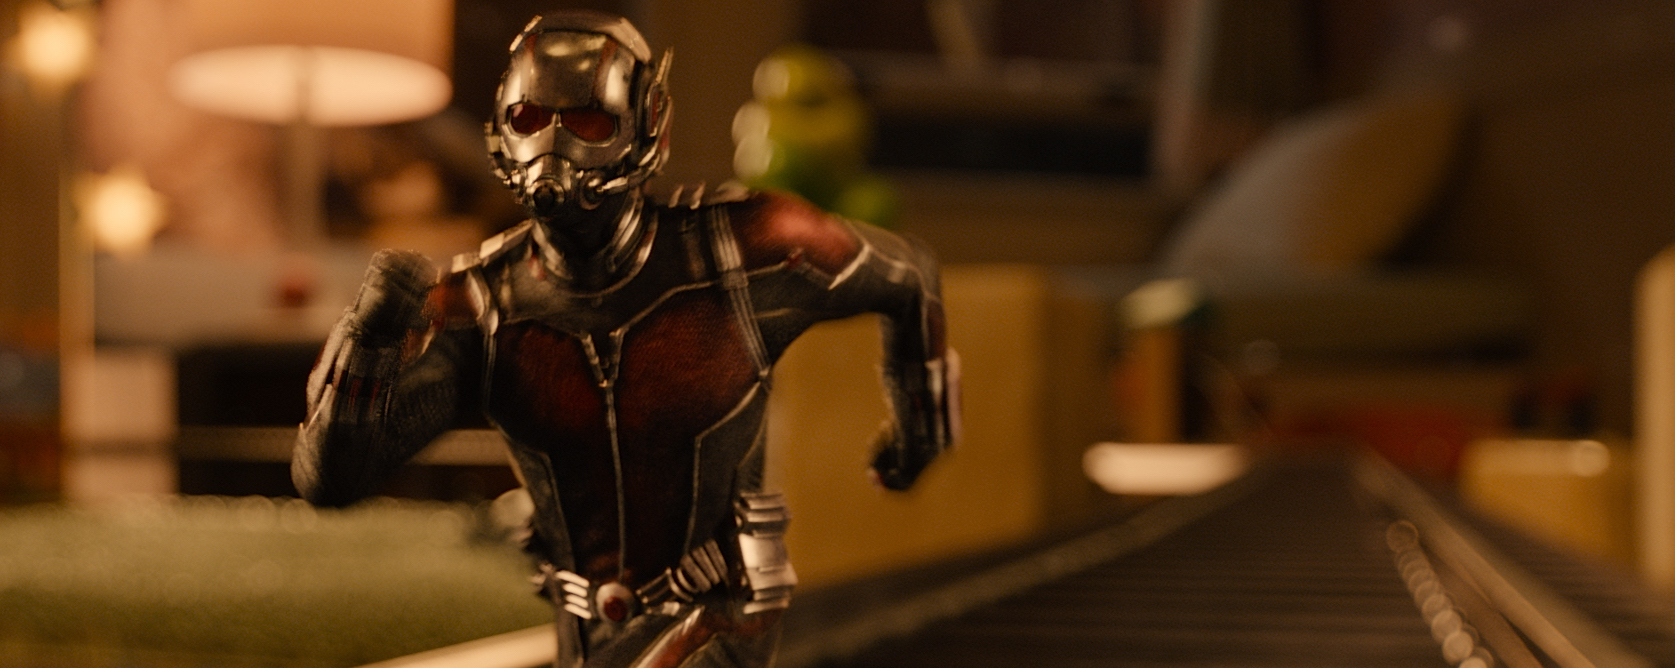 Marvel’s ANT-MAN Blu-ray Steelbook releases today at Best Buy